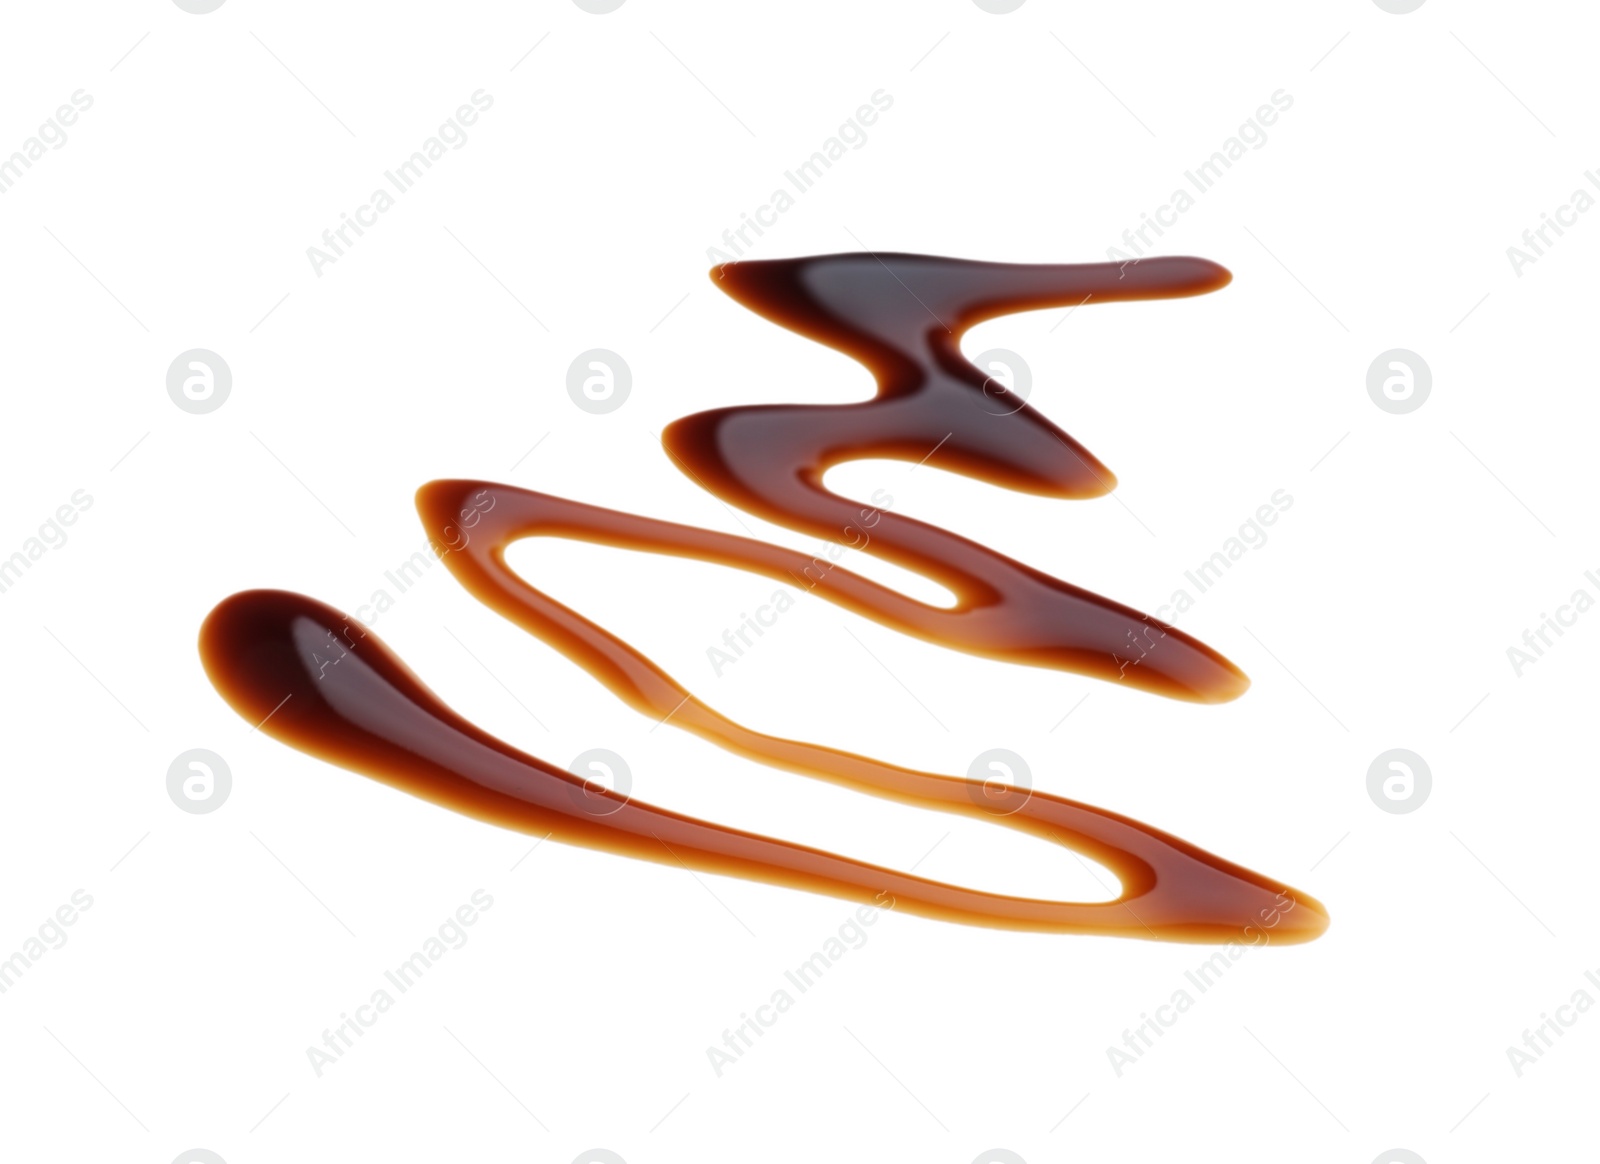 Photo of Smear of soy sauce spilled on white background